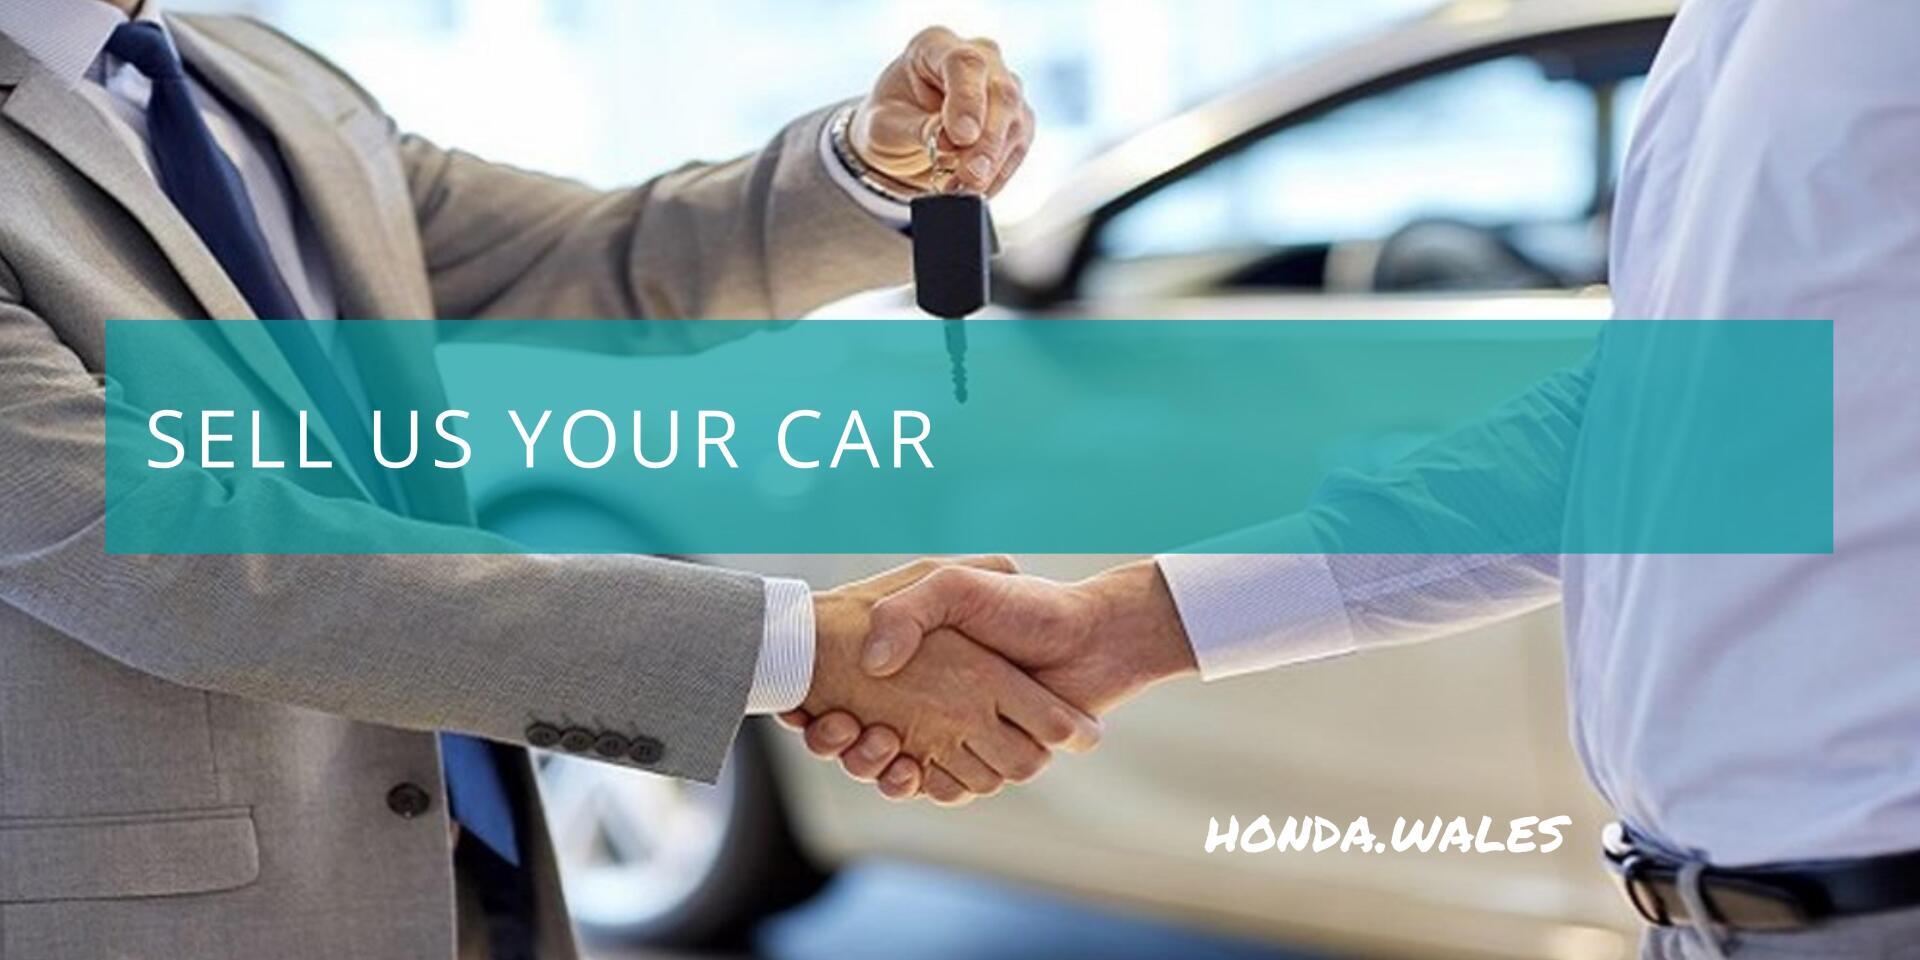 CAR VALUATION - Interested in selling your car?